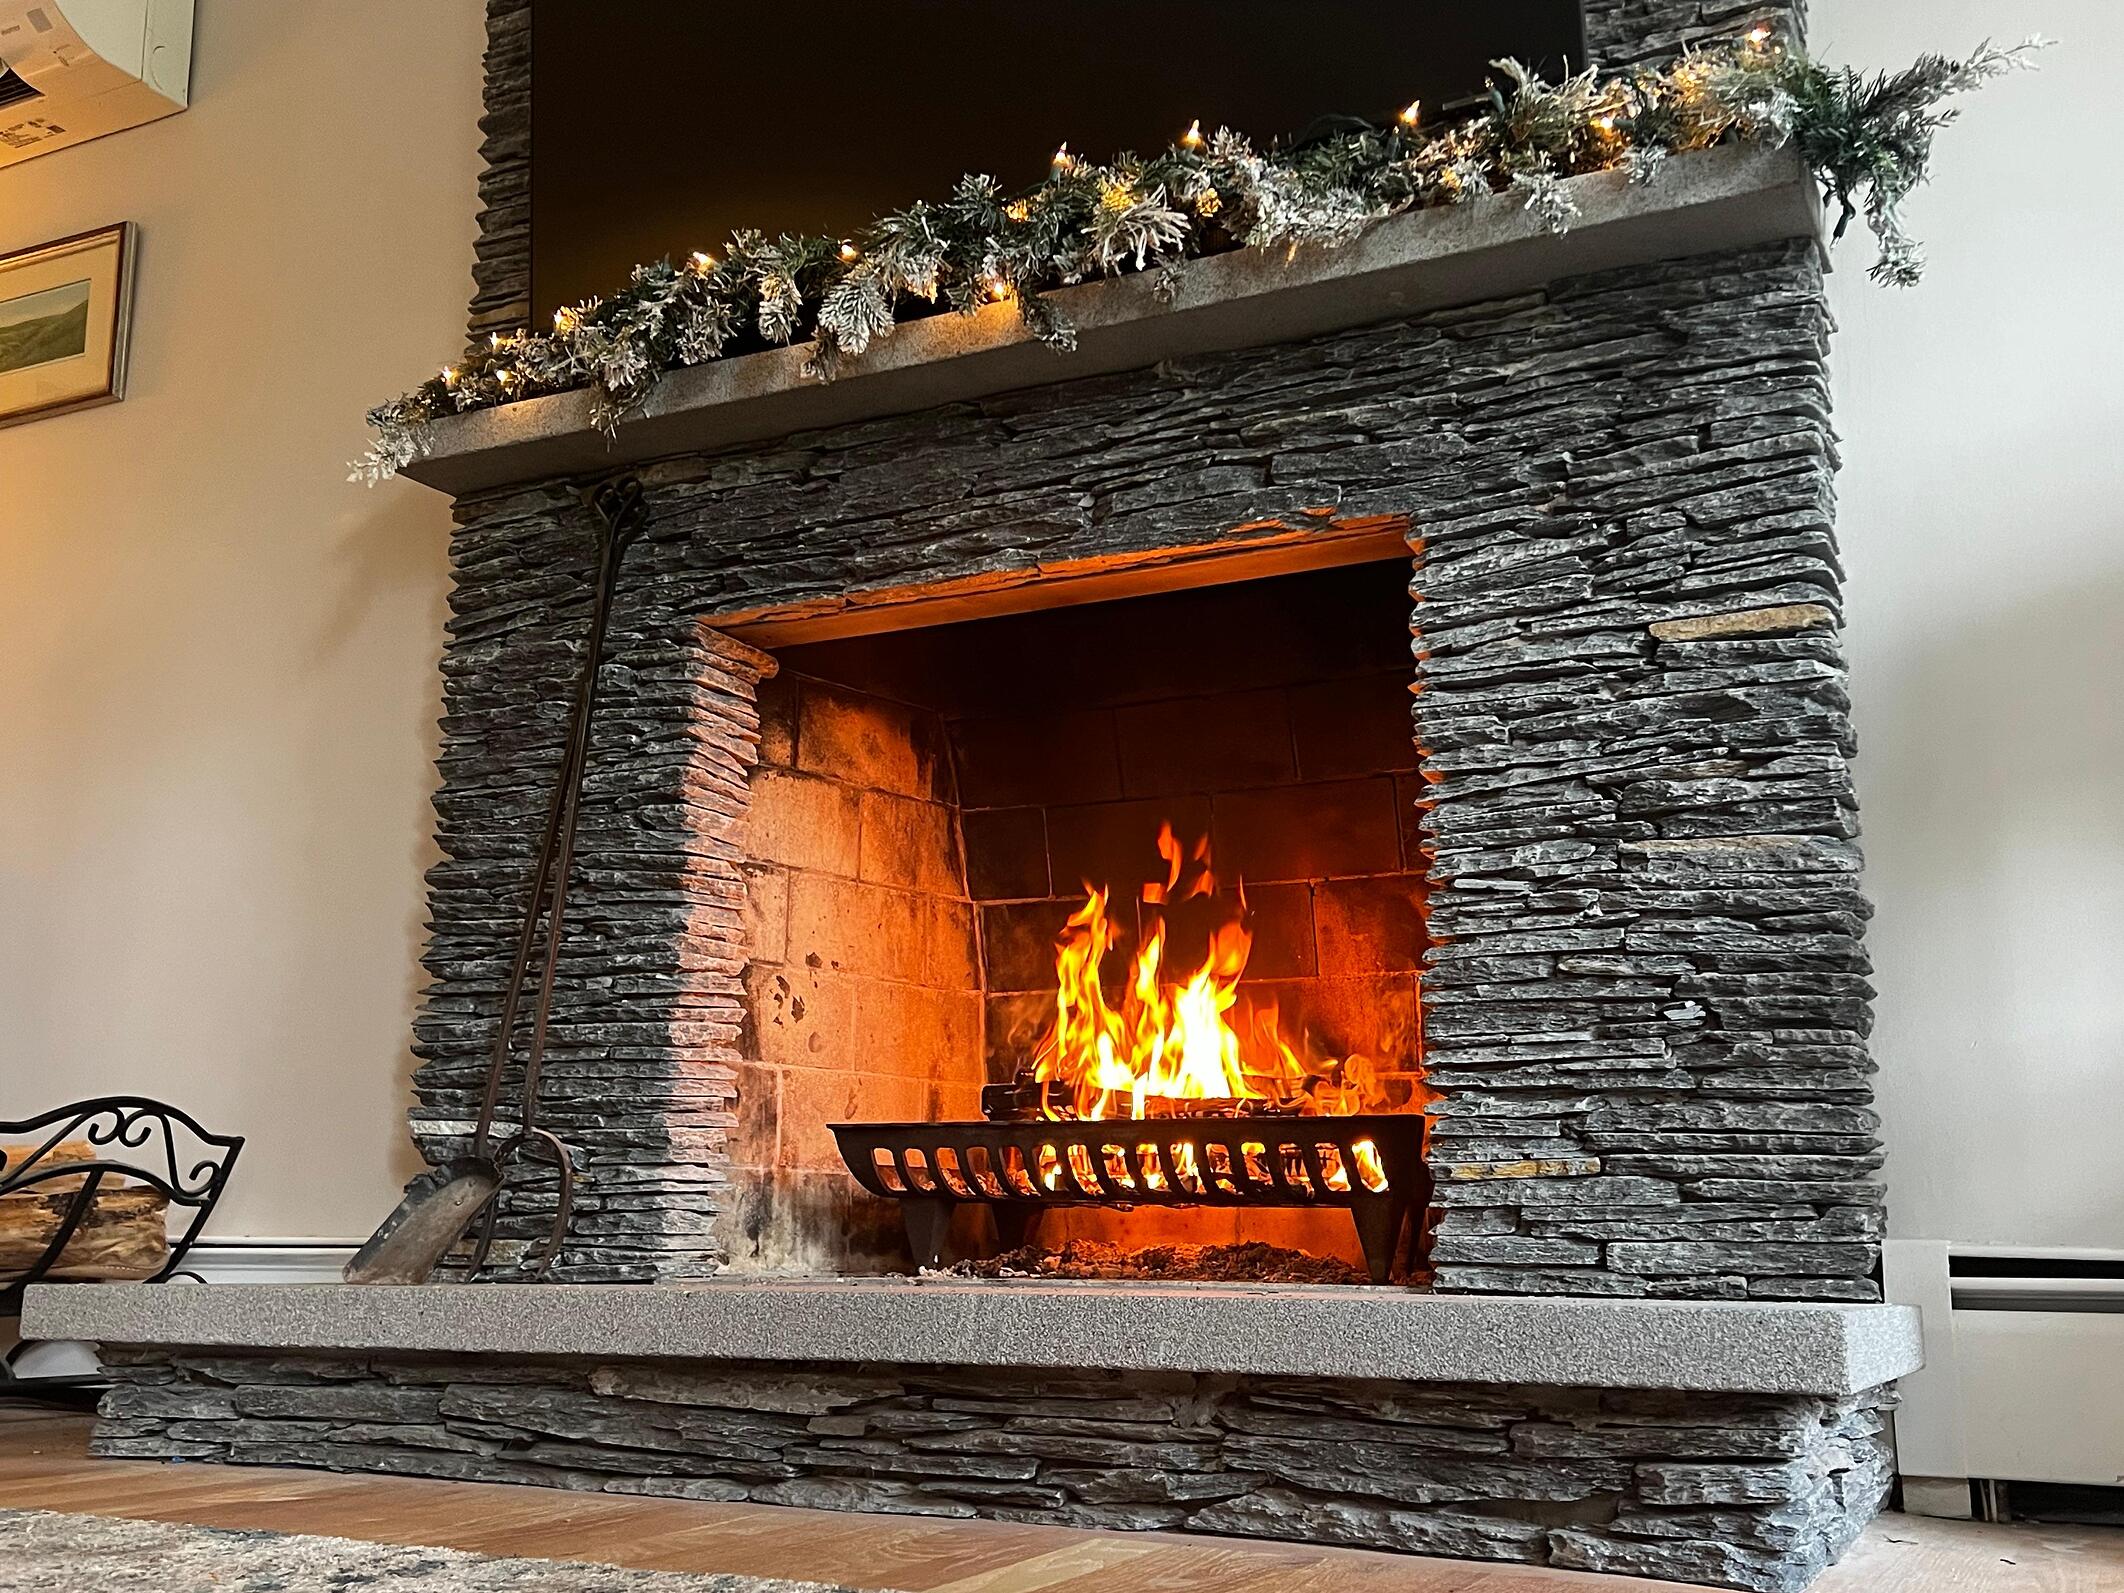 Creating a Decorative Fireplace With Stone Veneer This Holiday Season